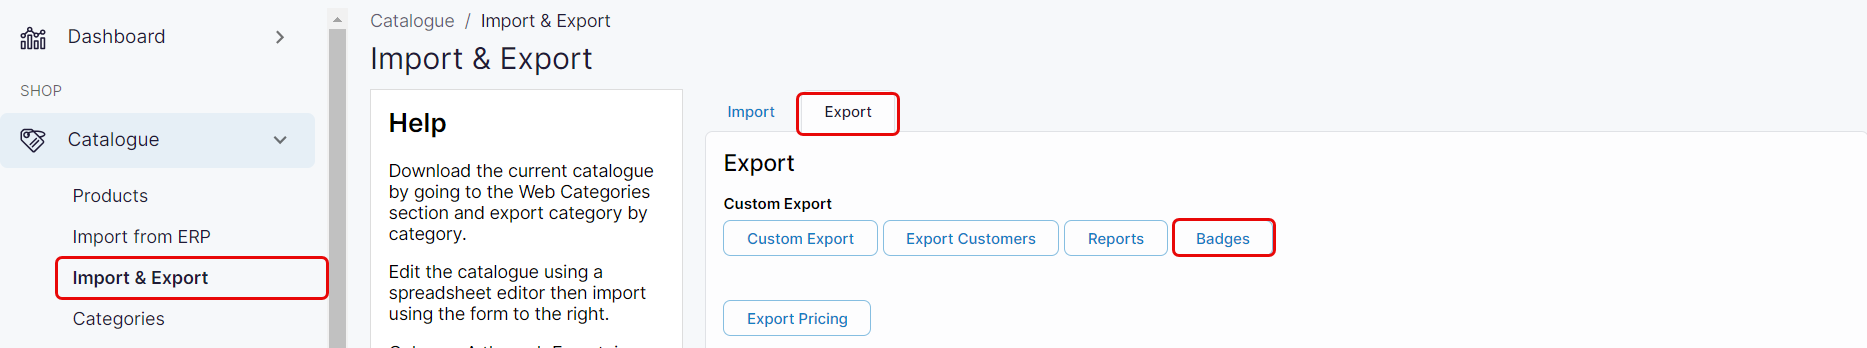 ExportBadgeInfo.png